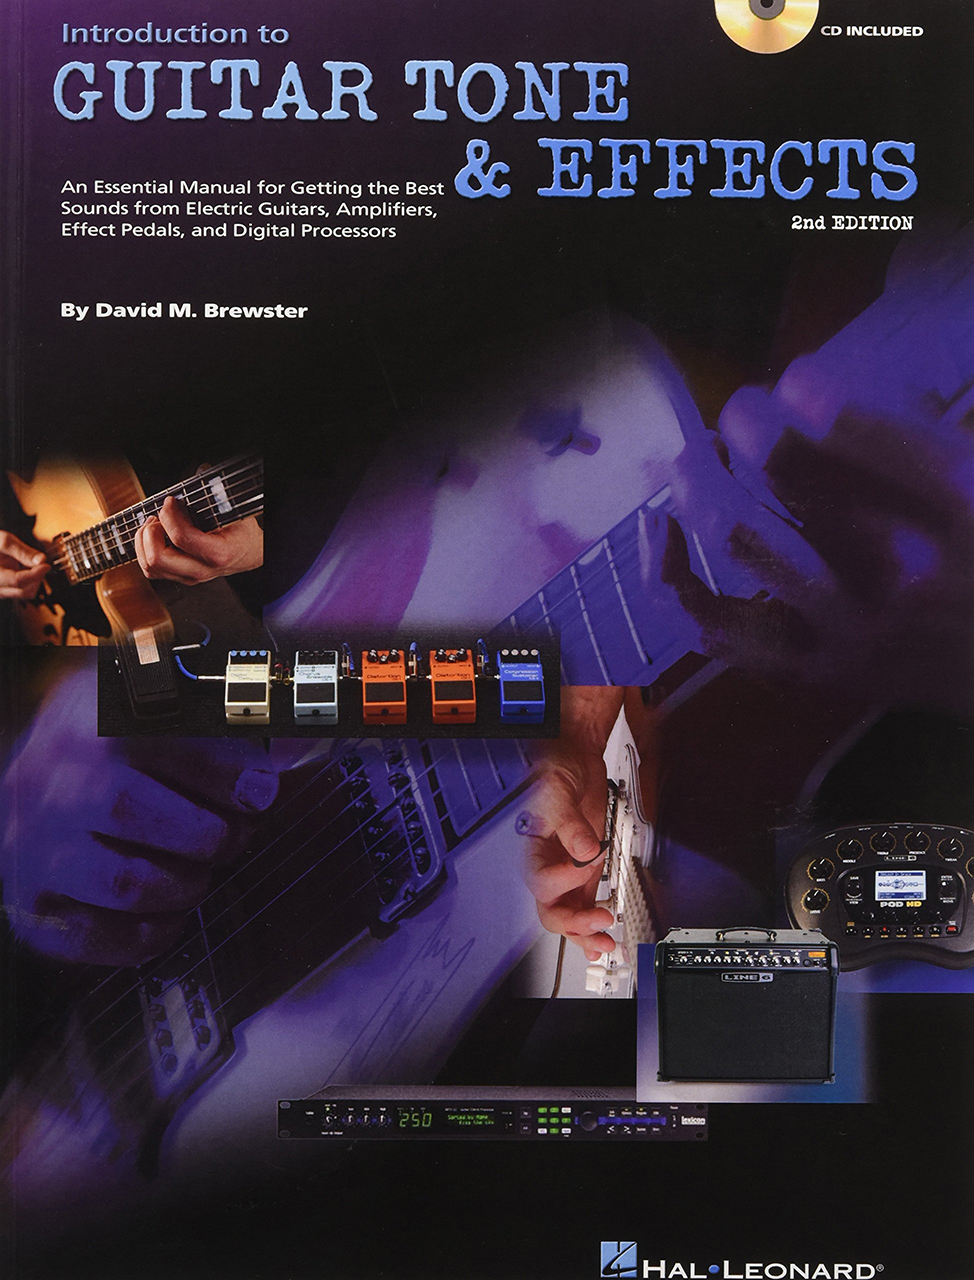 Introduction to Guitar Tone and Effects